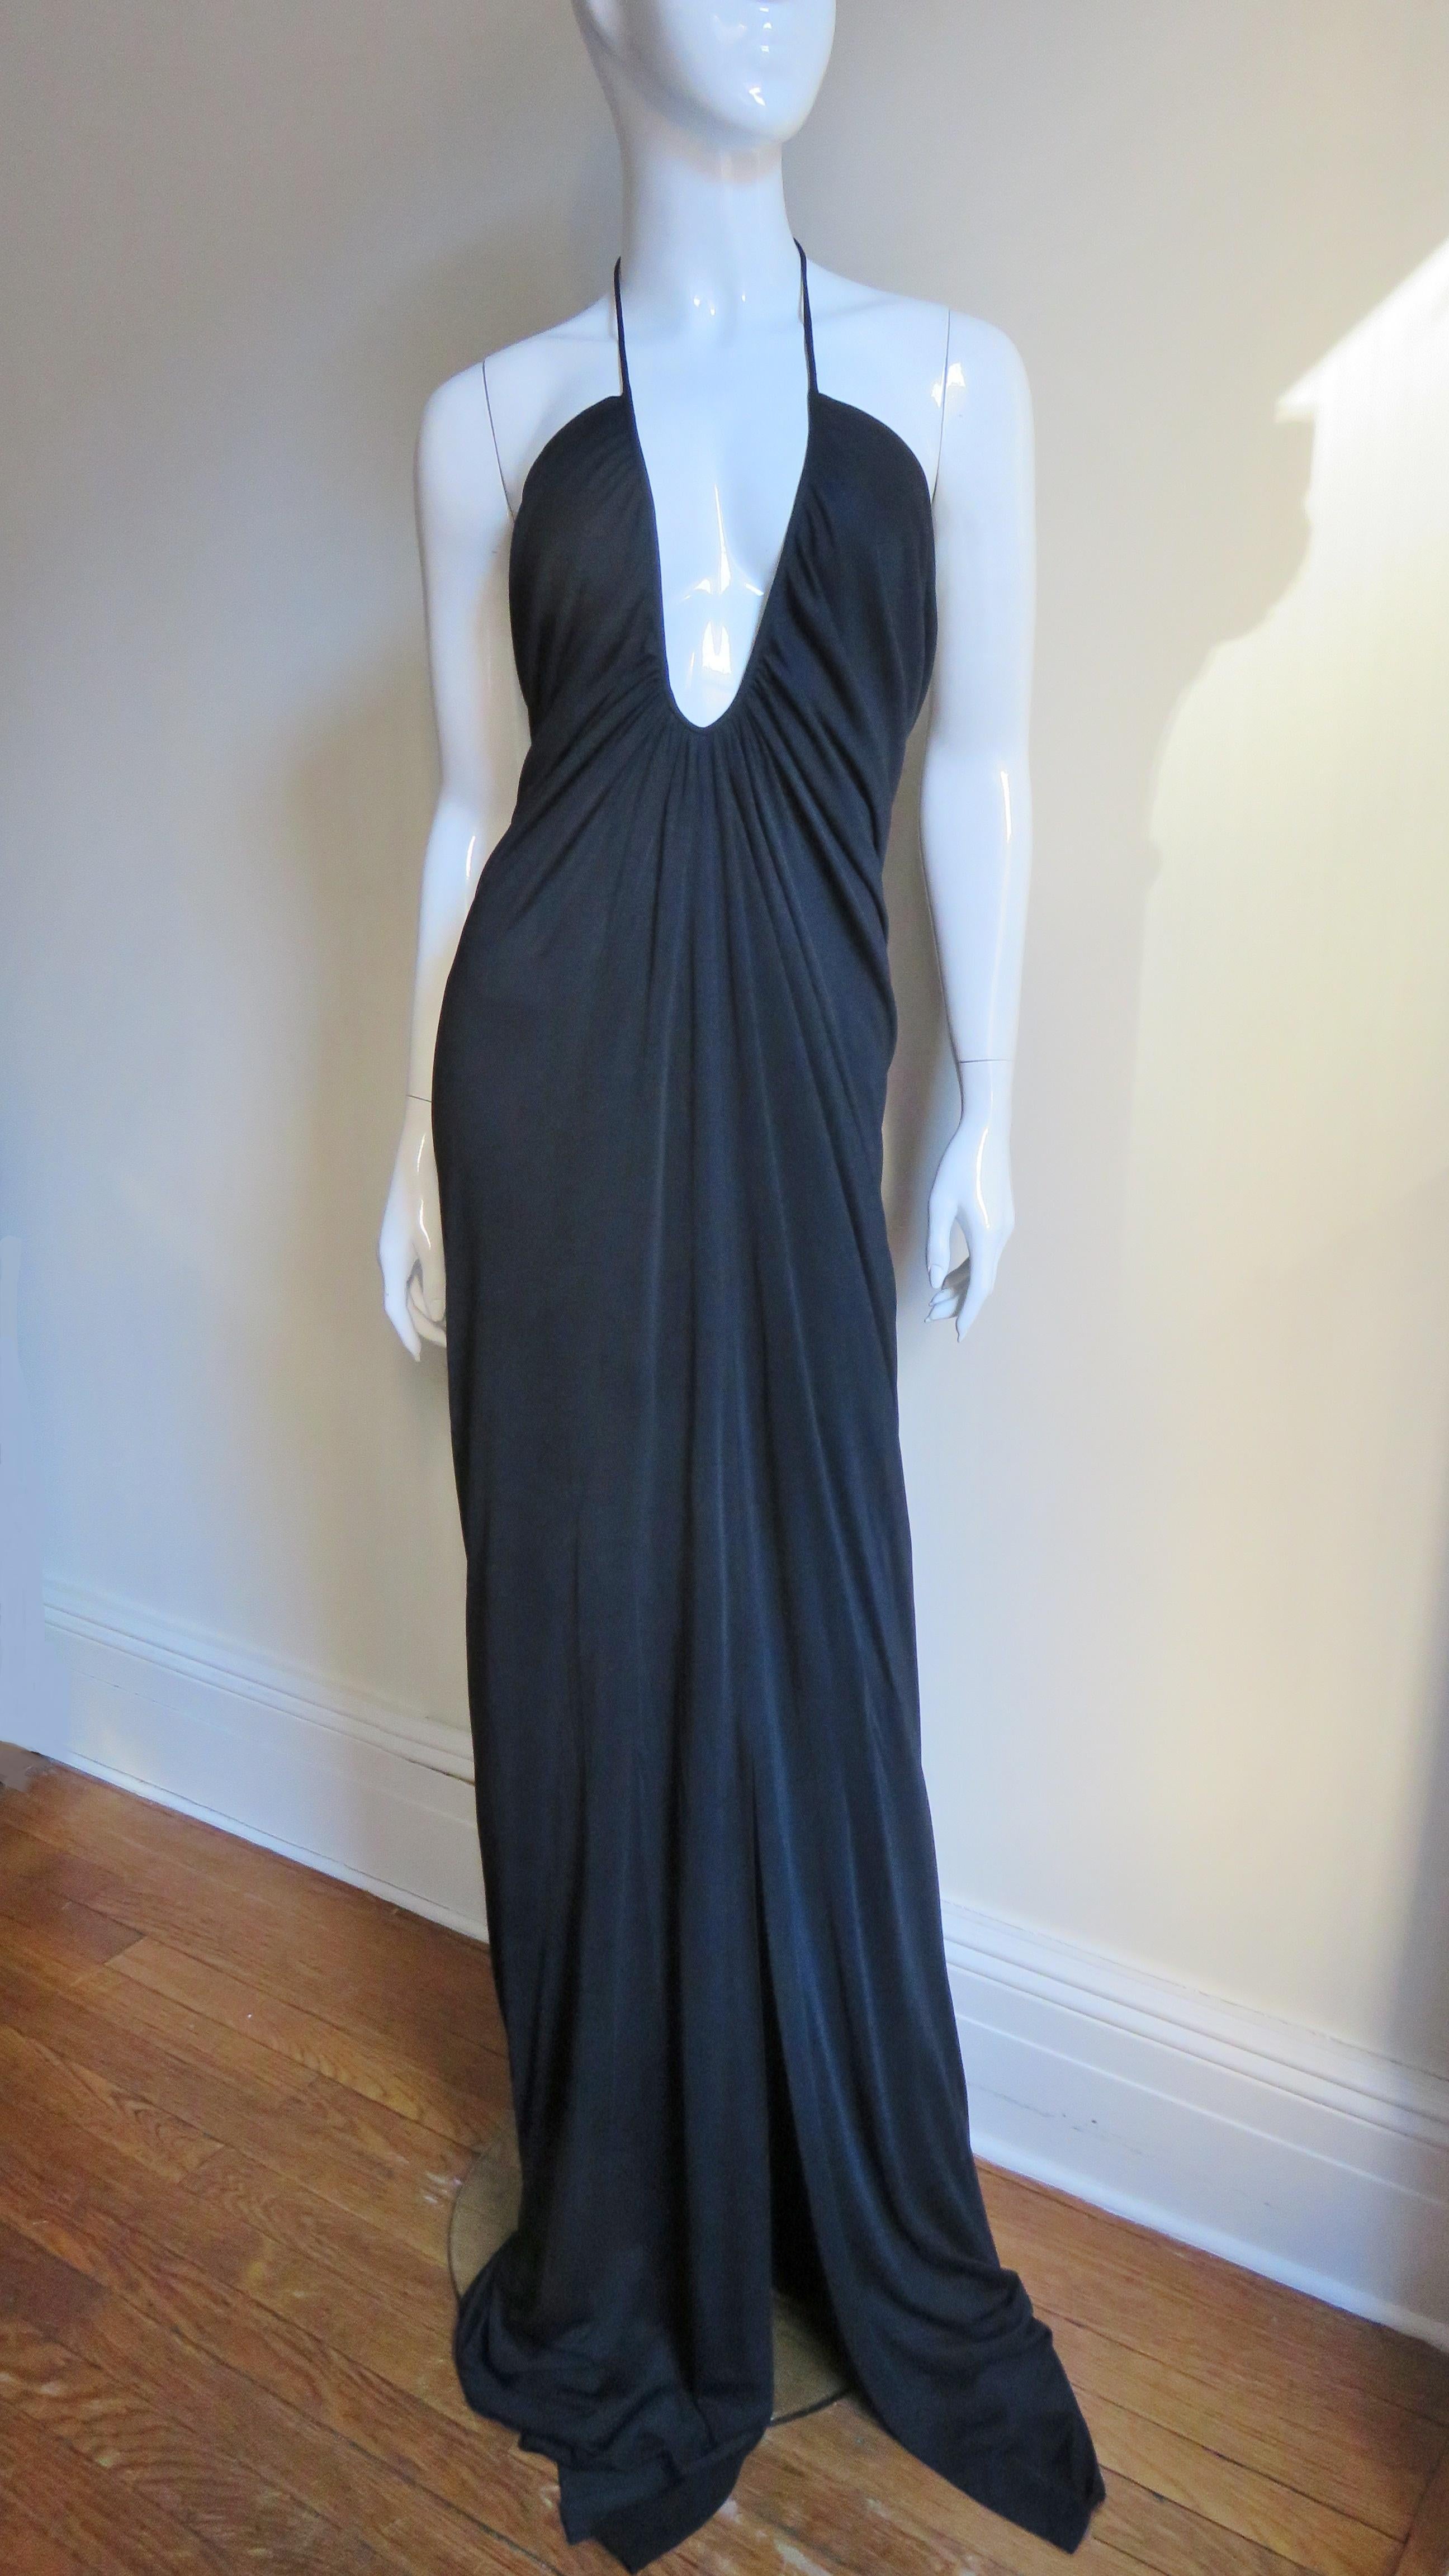 A gorgeous black jersey dress from Gucci.  It has a deep plunging rounded V front adjustable tie halter neckline, the back drapes to just below the waist.   There are metal Gucci engraved aglets on the ends of the ties at the neck and a slit at the